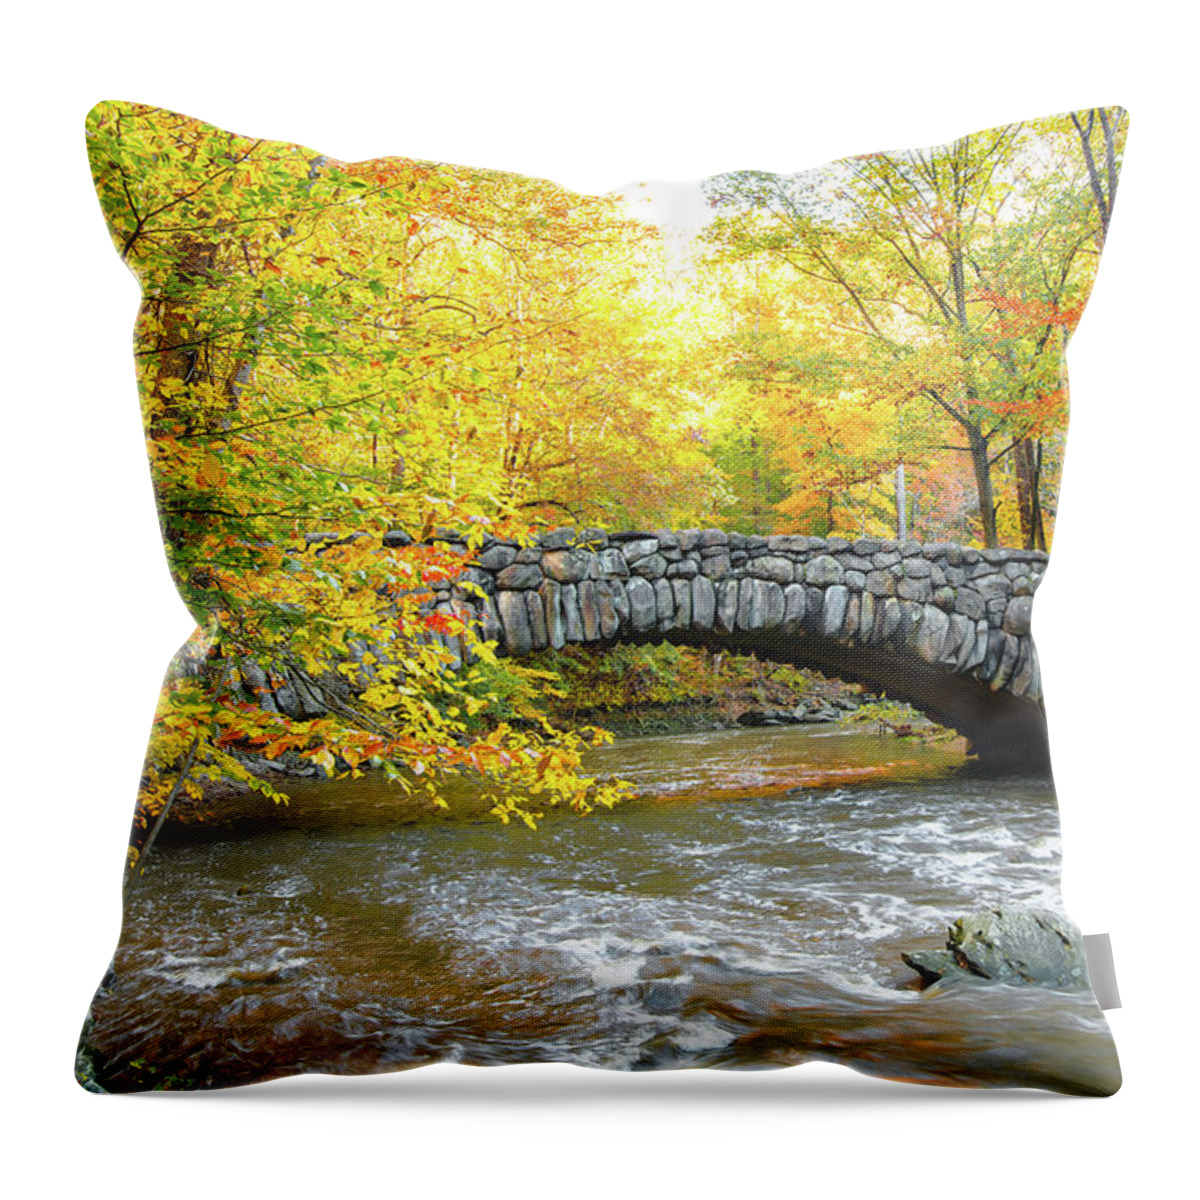 03nov18 Throw Pillow featuring the photograph Rock Creek Boulder Bridge with Fall Colors by Jeff at JSJ Photography